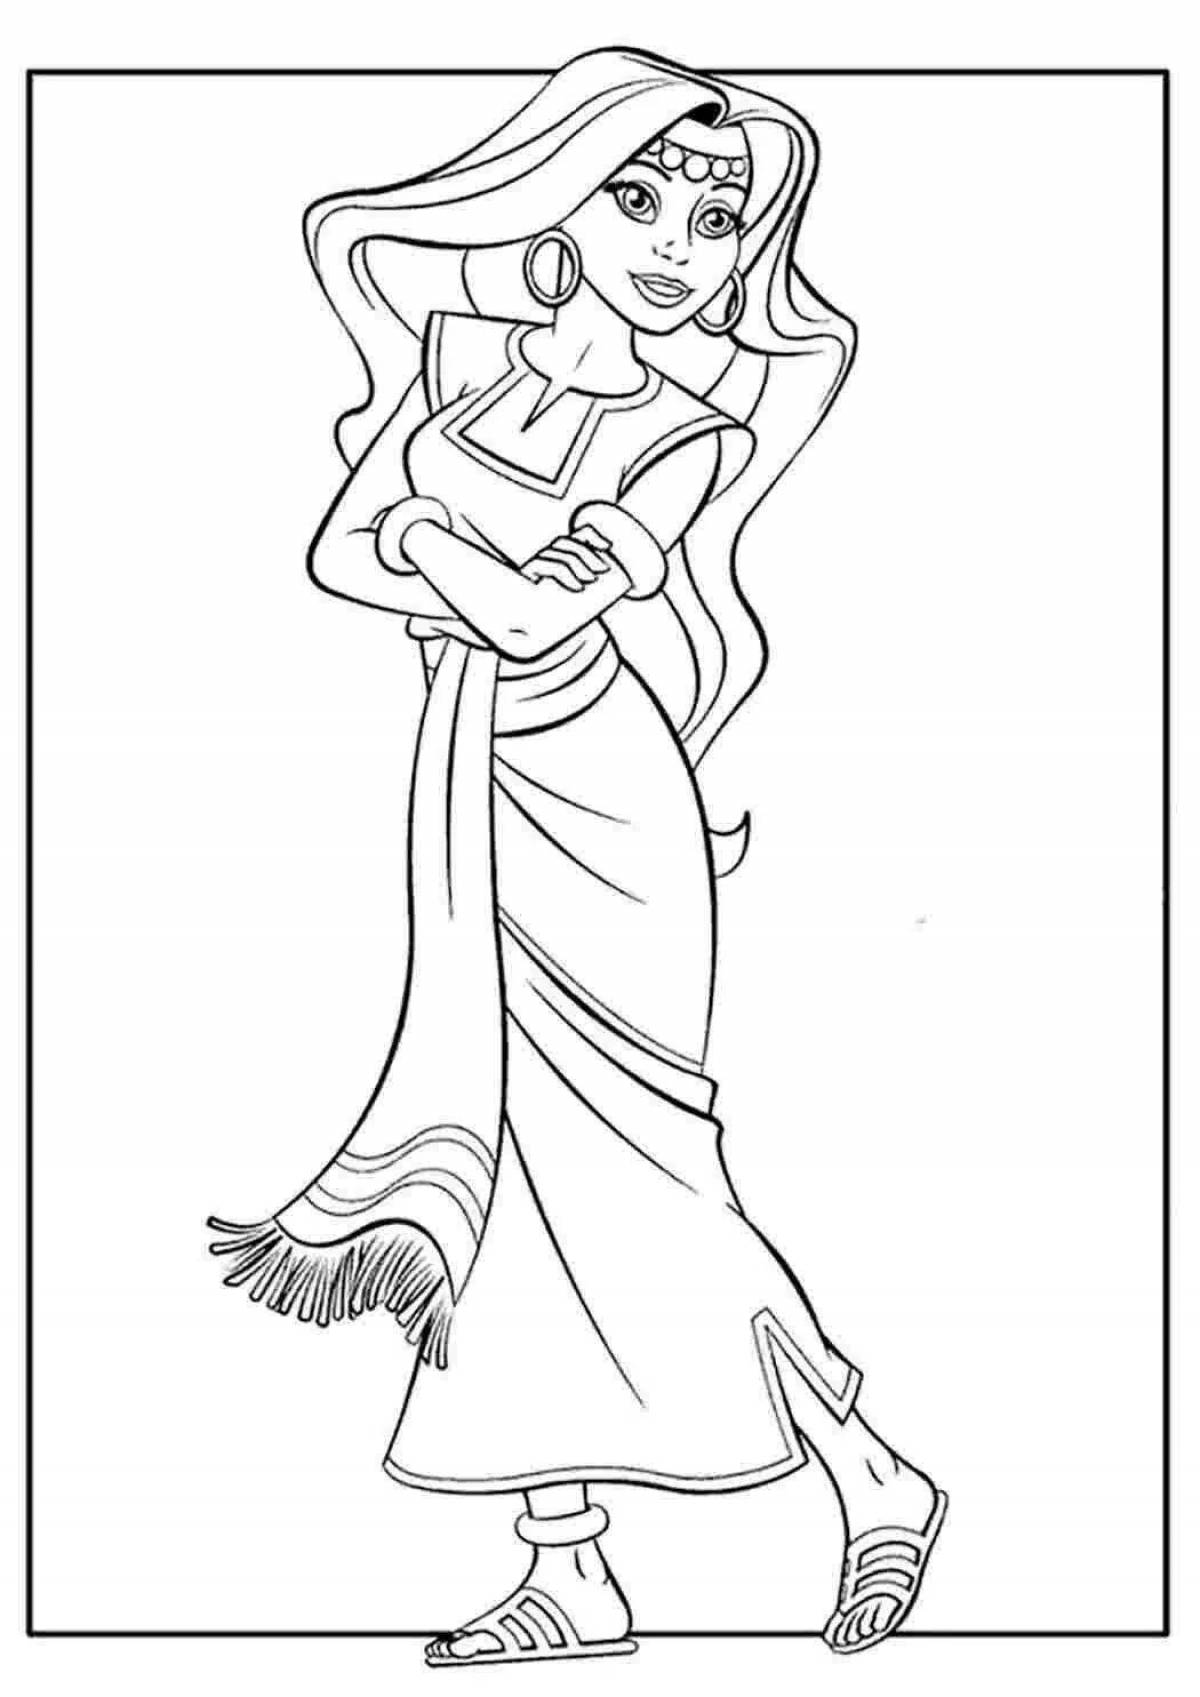 Esther blooming coloring page